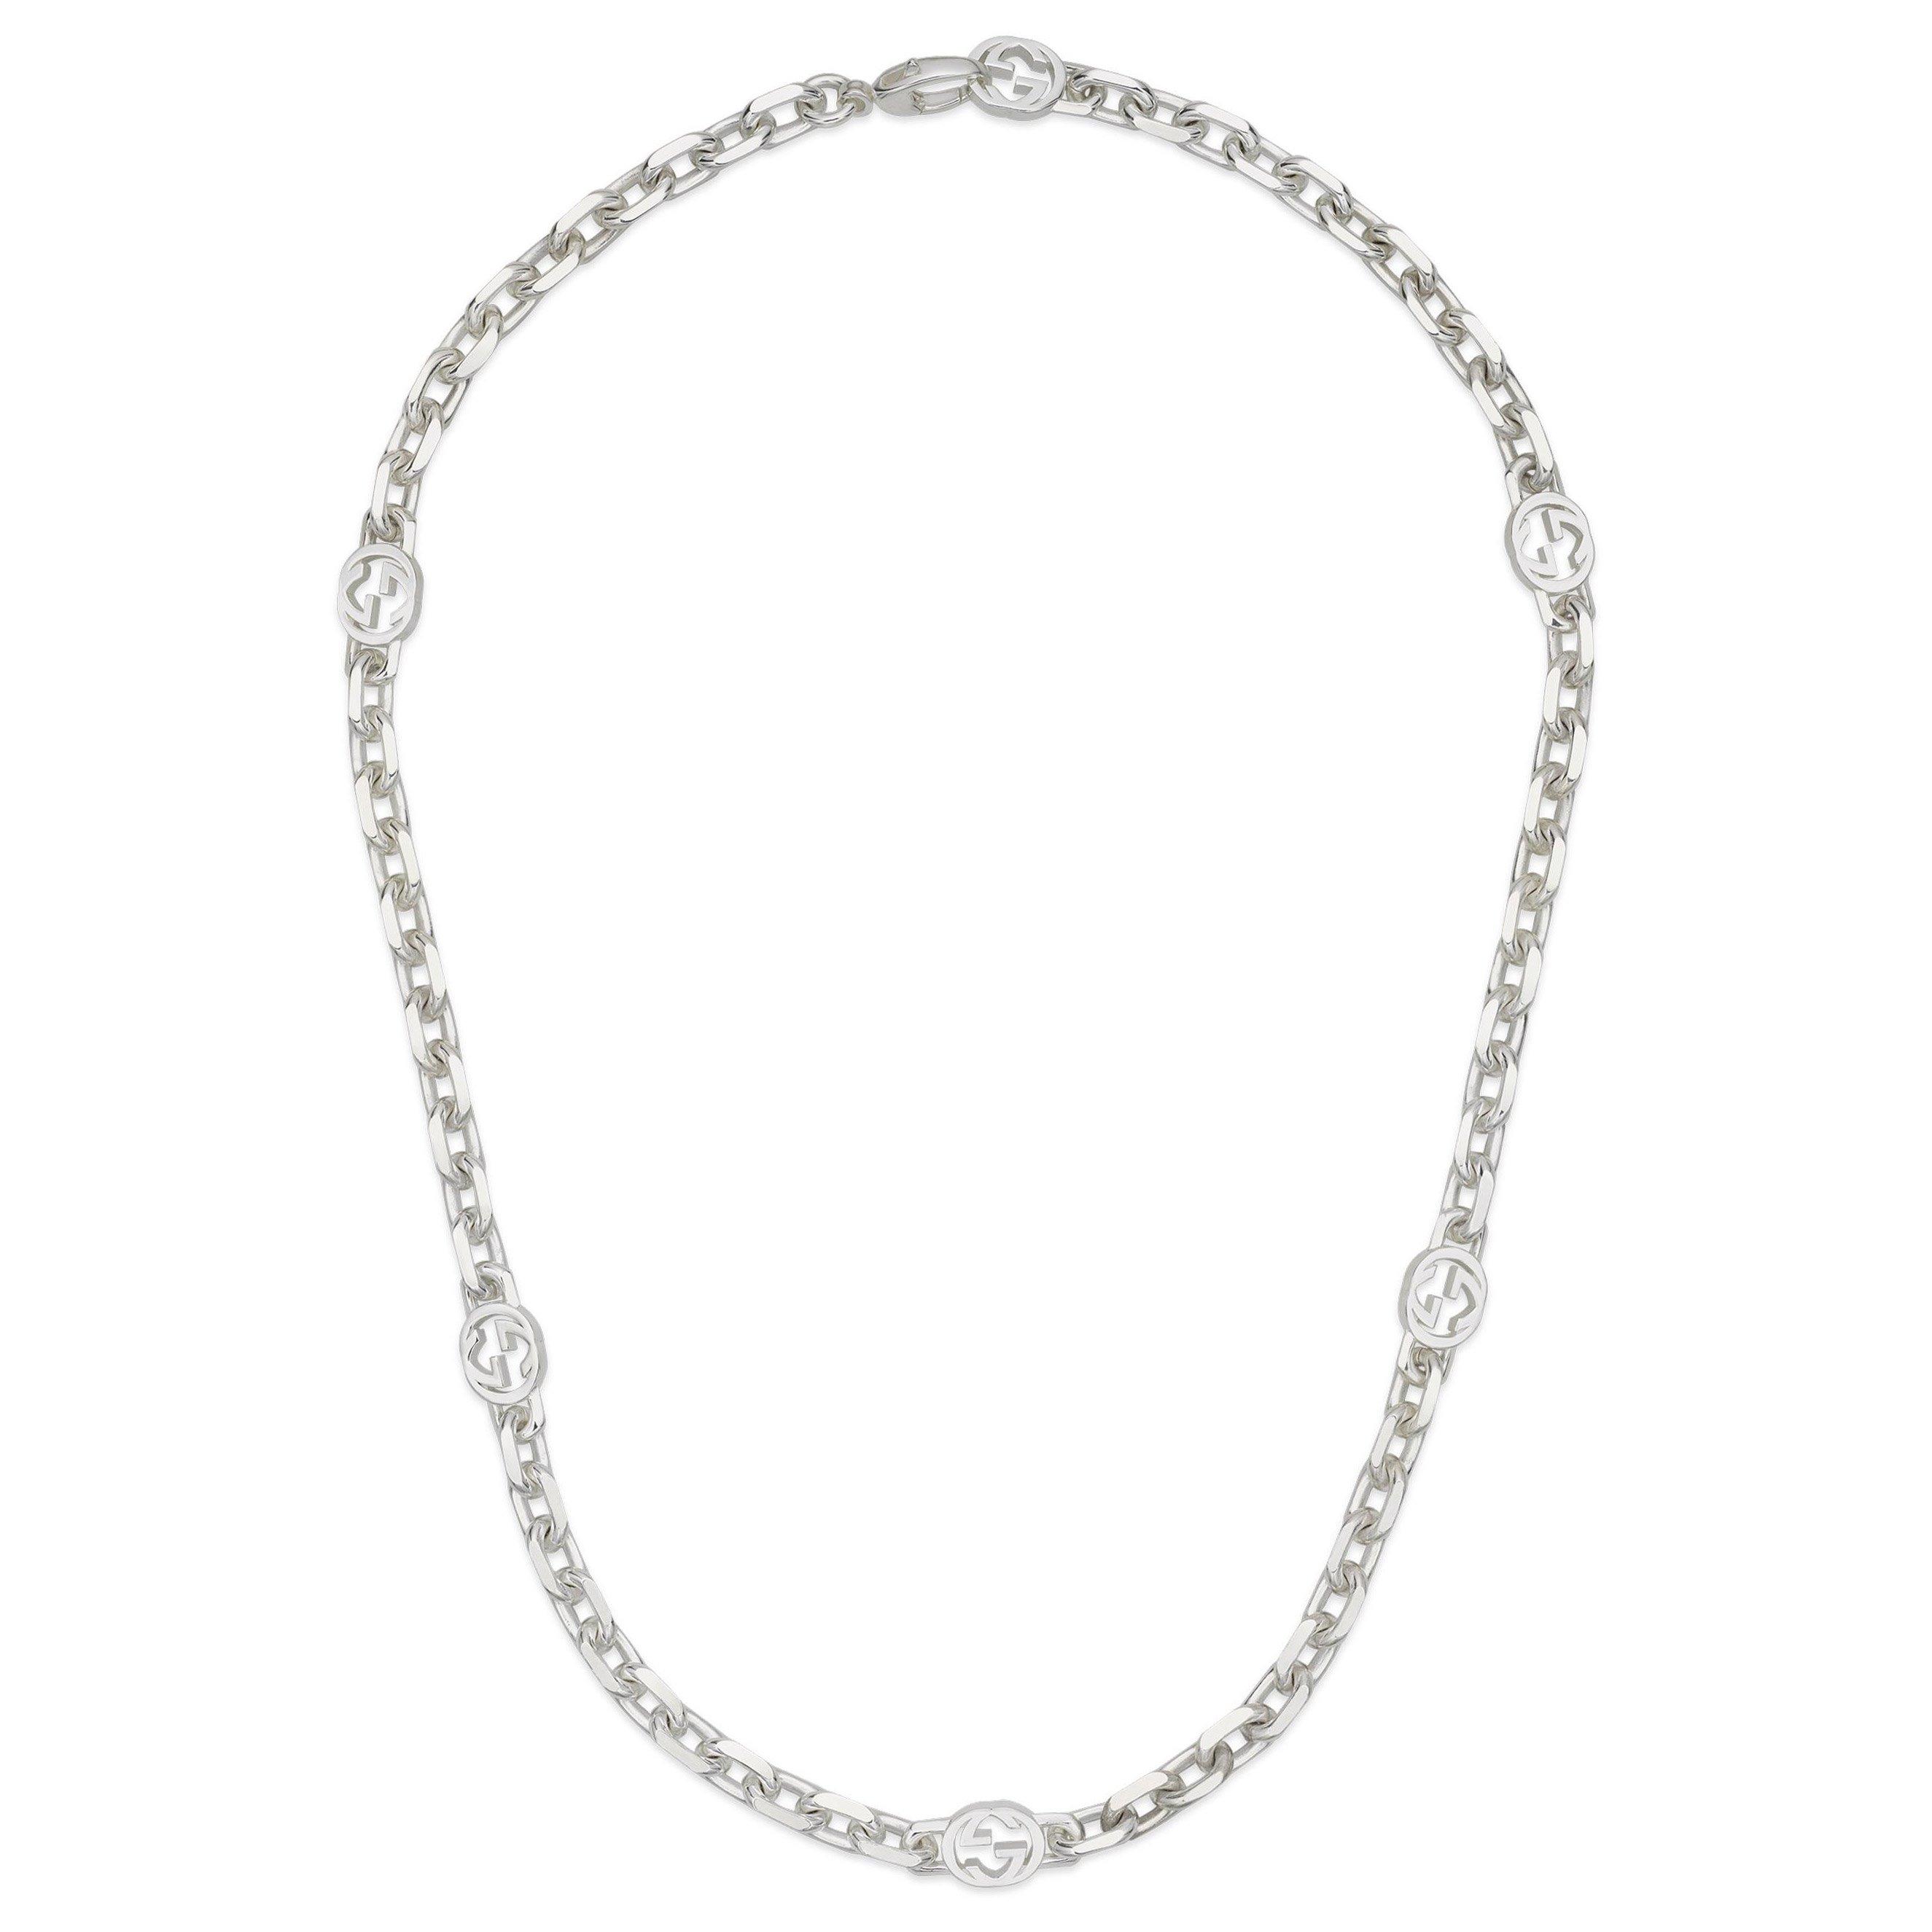 Gucci Interlocking Silver Necklace | 0136617 | Beaverbrooks the Jewellers